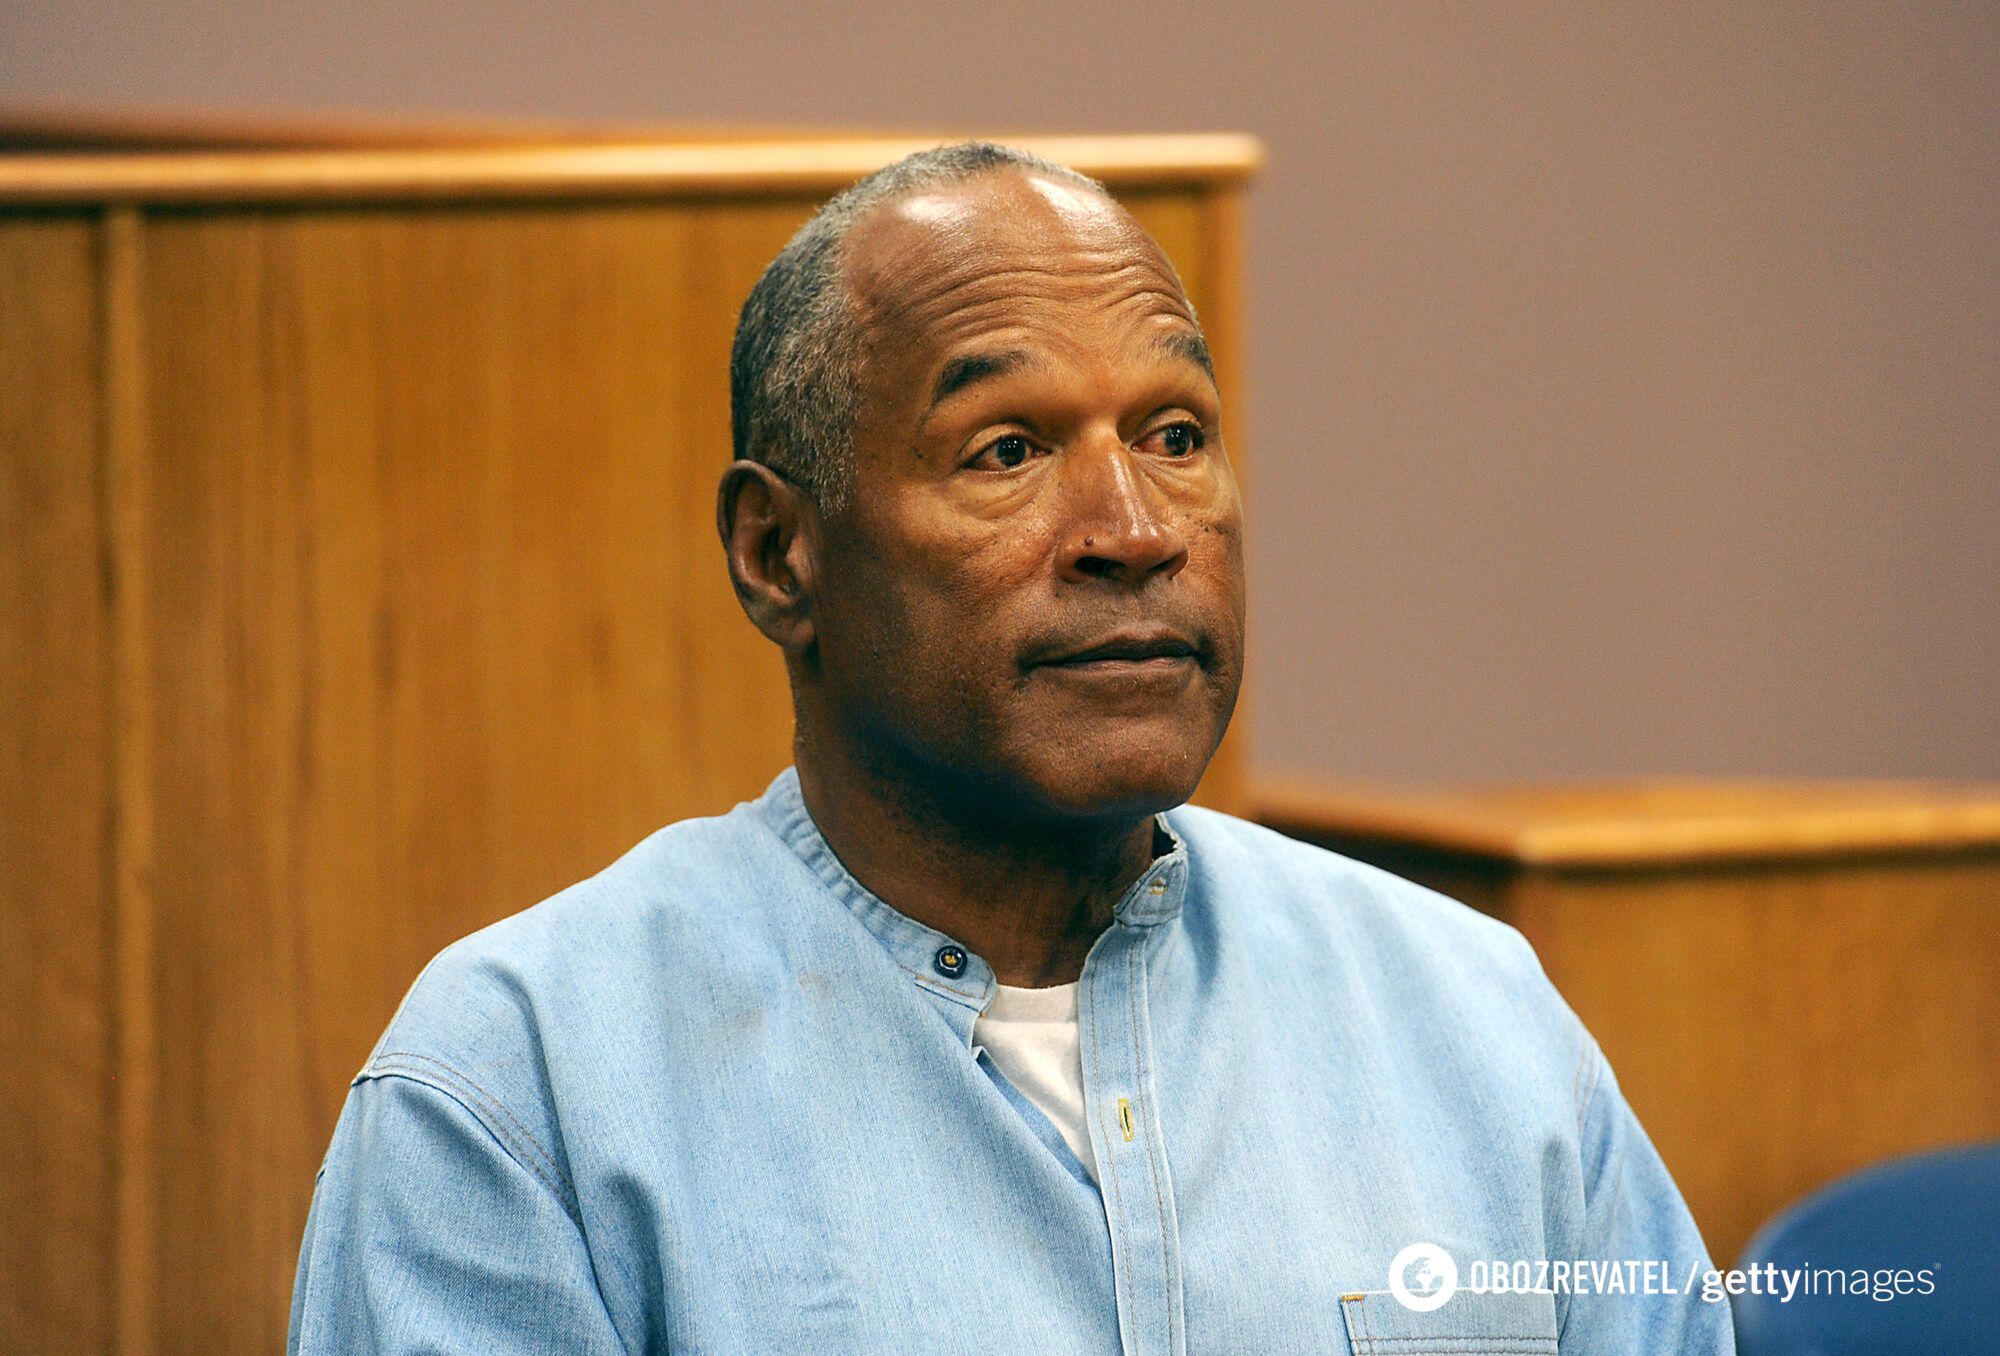 Actor O.J. Simpson, who was accused of killing his wife and her friend, has died: this is one of the most high-profile cases in the United States